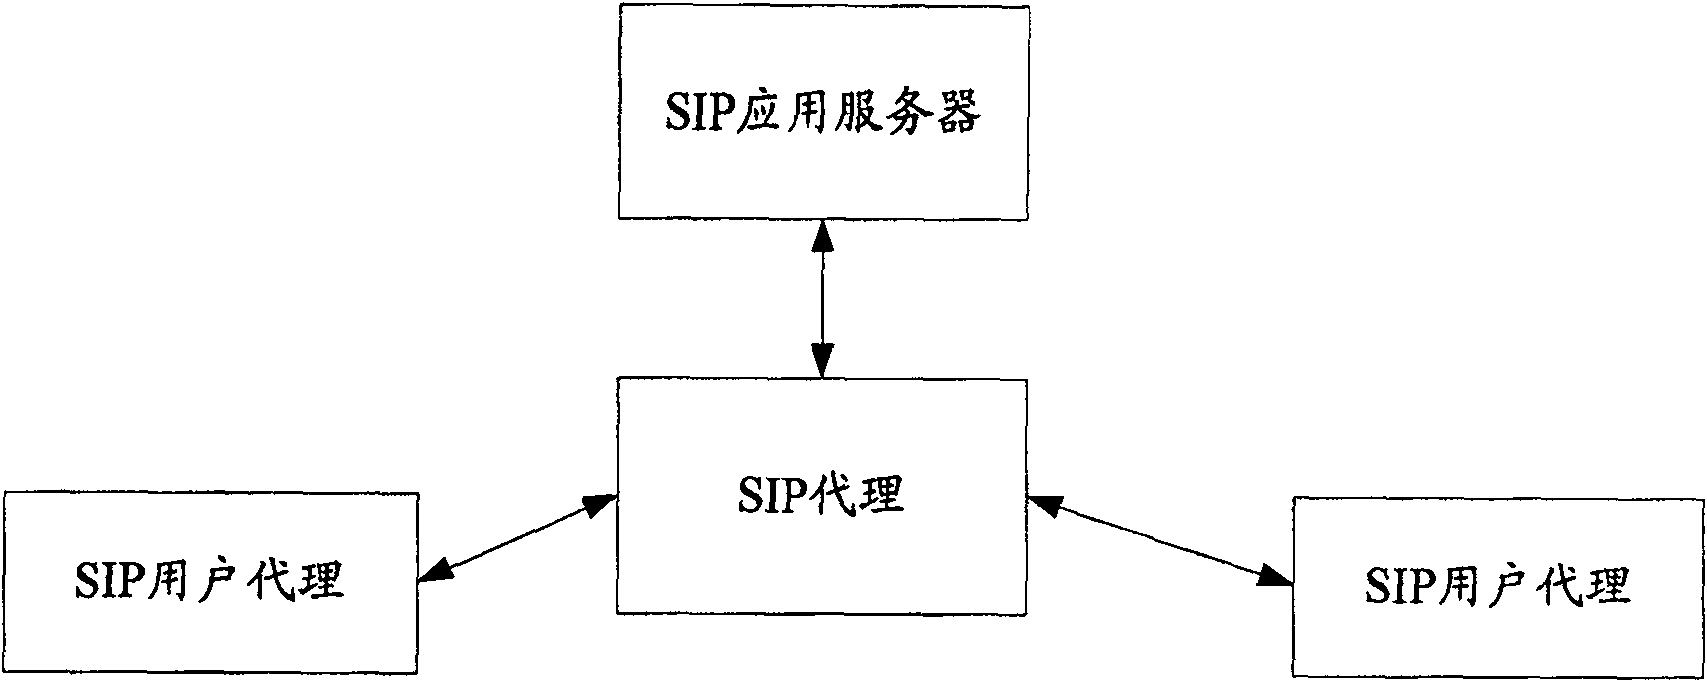 System, device and method for filtering session initiat protocol message